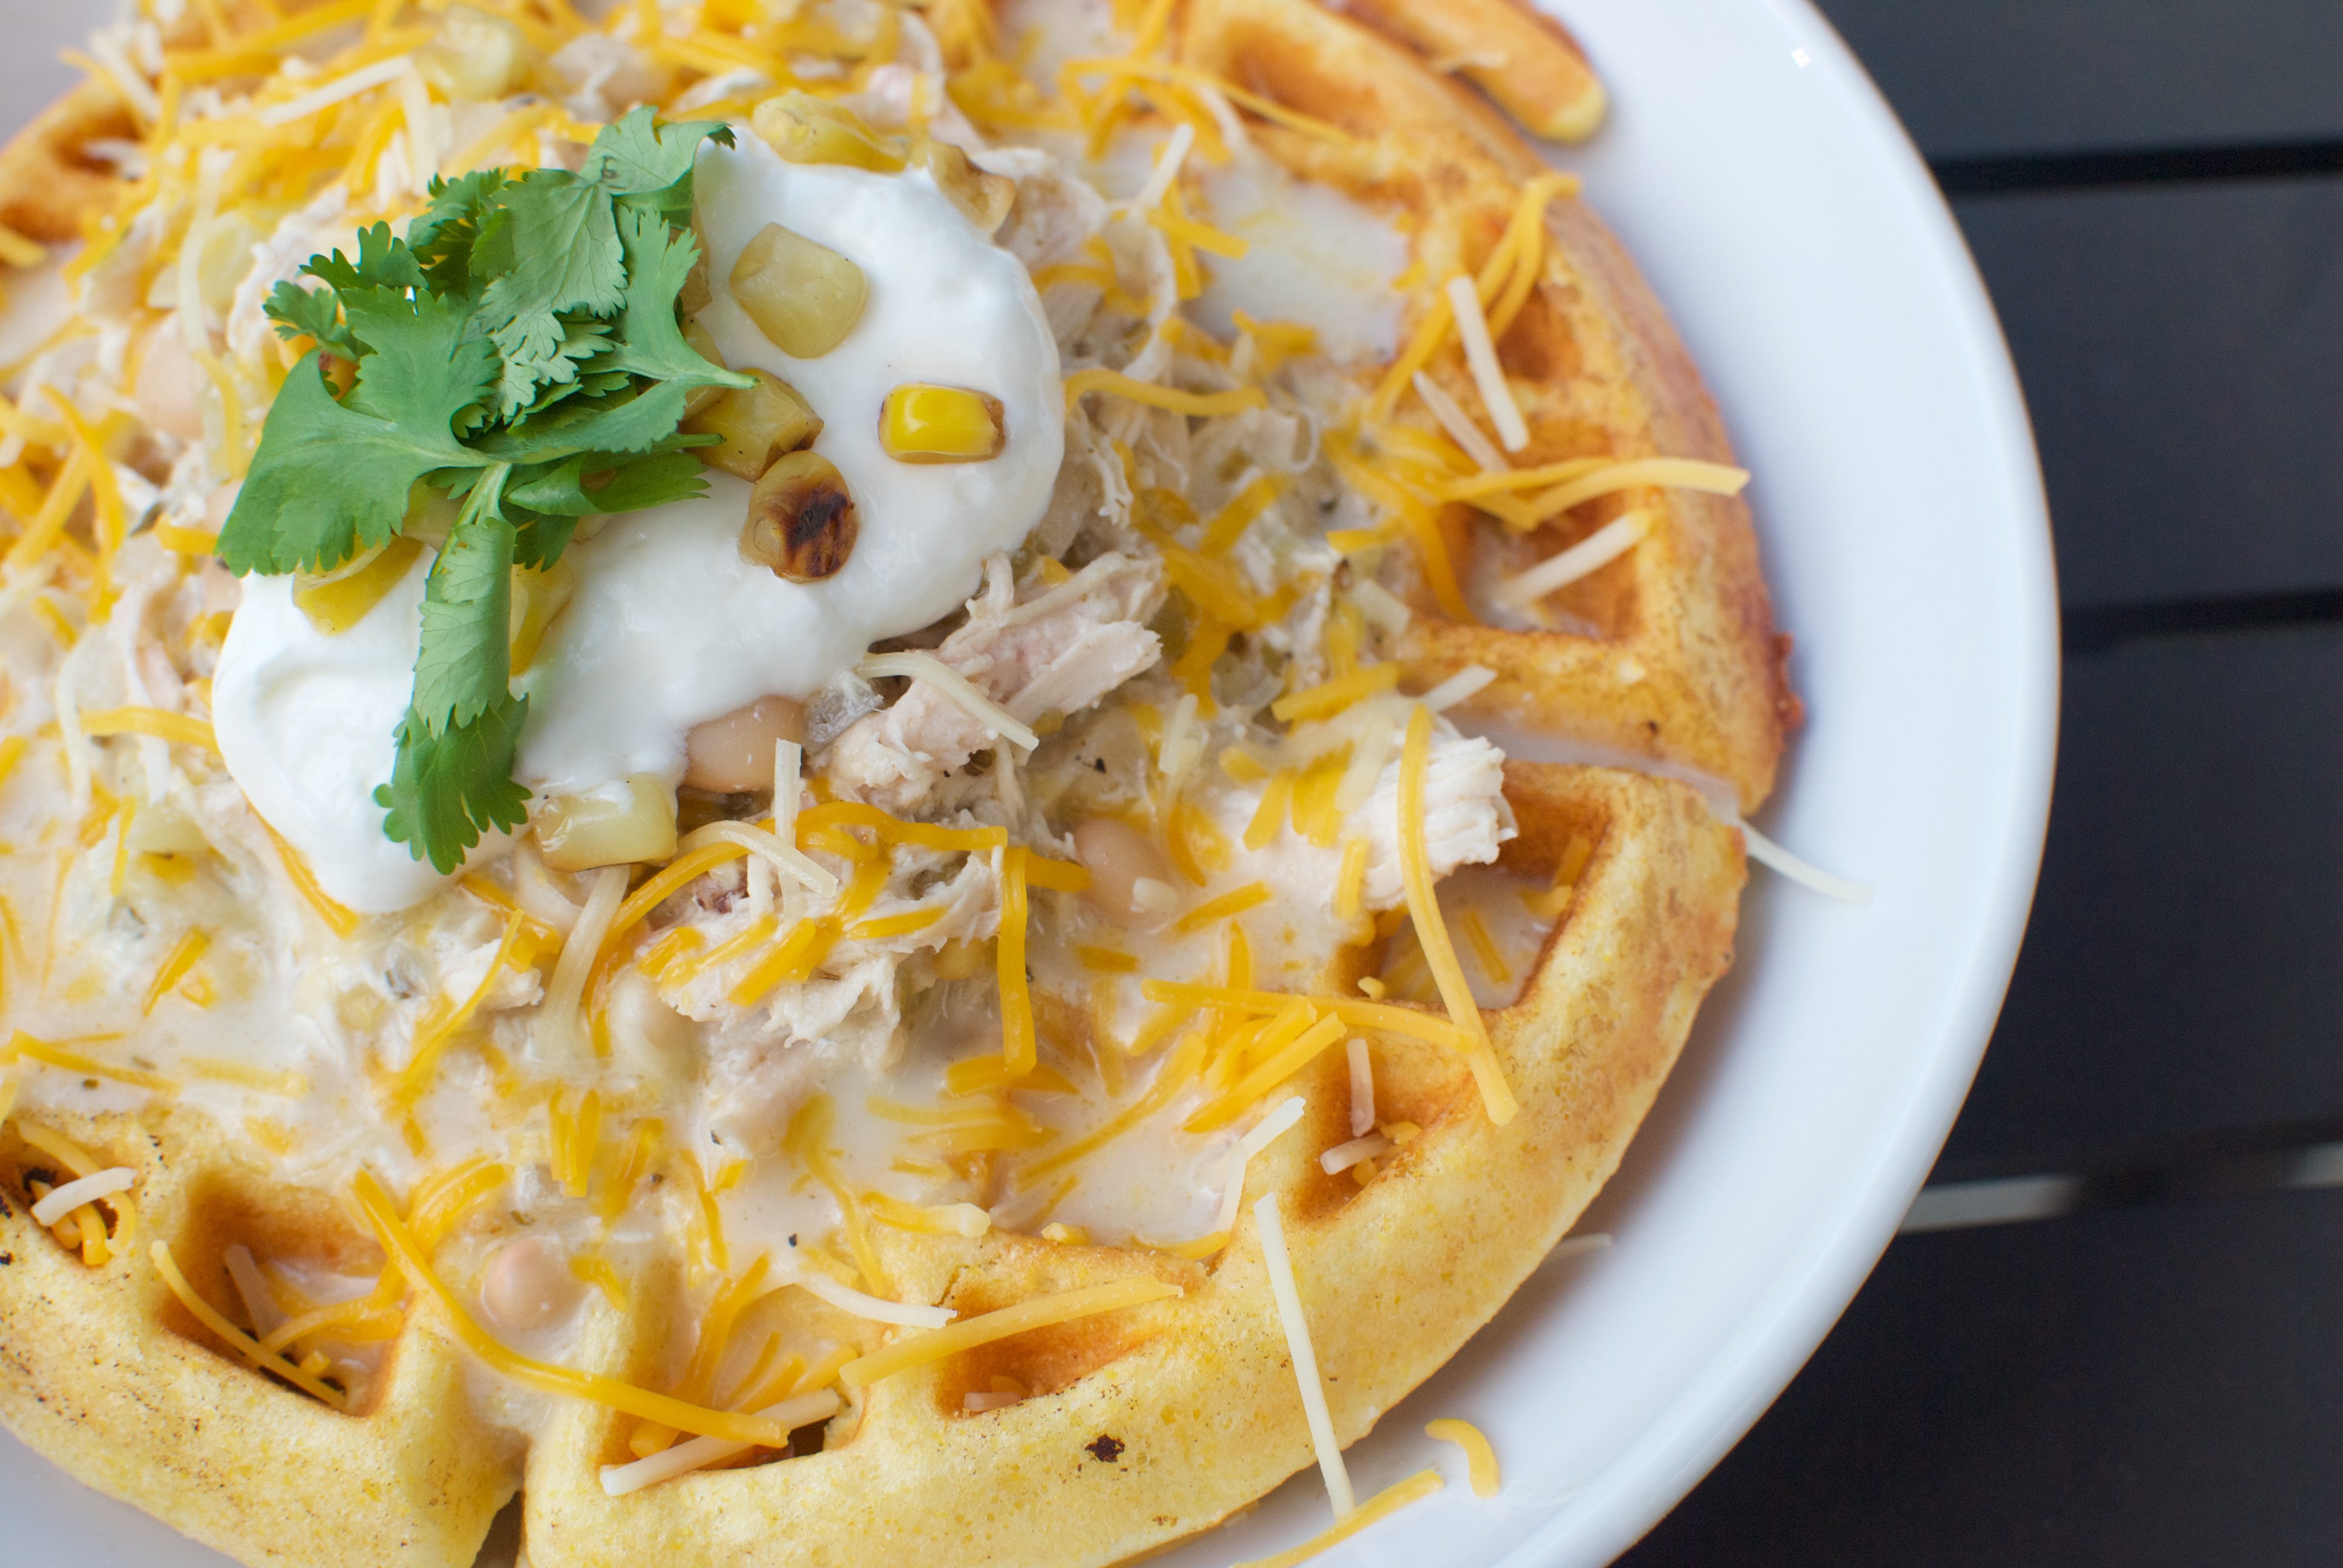 white bean chicken chili over cornbread waffles is a fun and festive soup any night of the week!